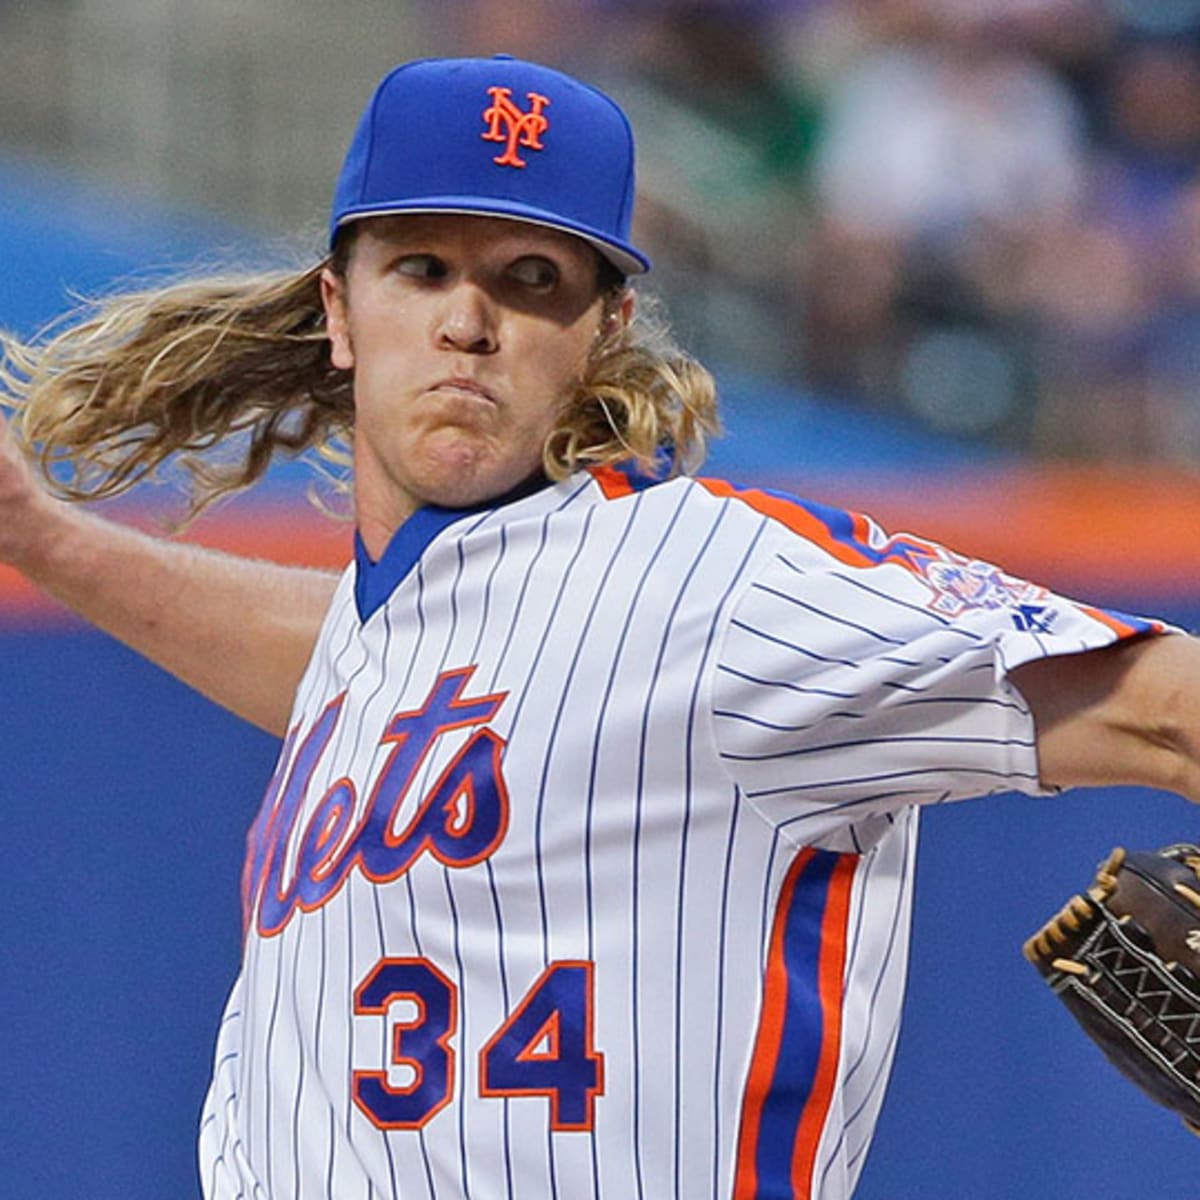 Mansfield Legacy grad, Mets pitcher Noah Syndergaard leaves his markon  his catcher